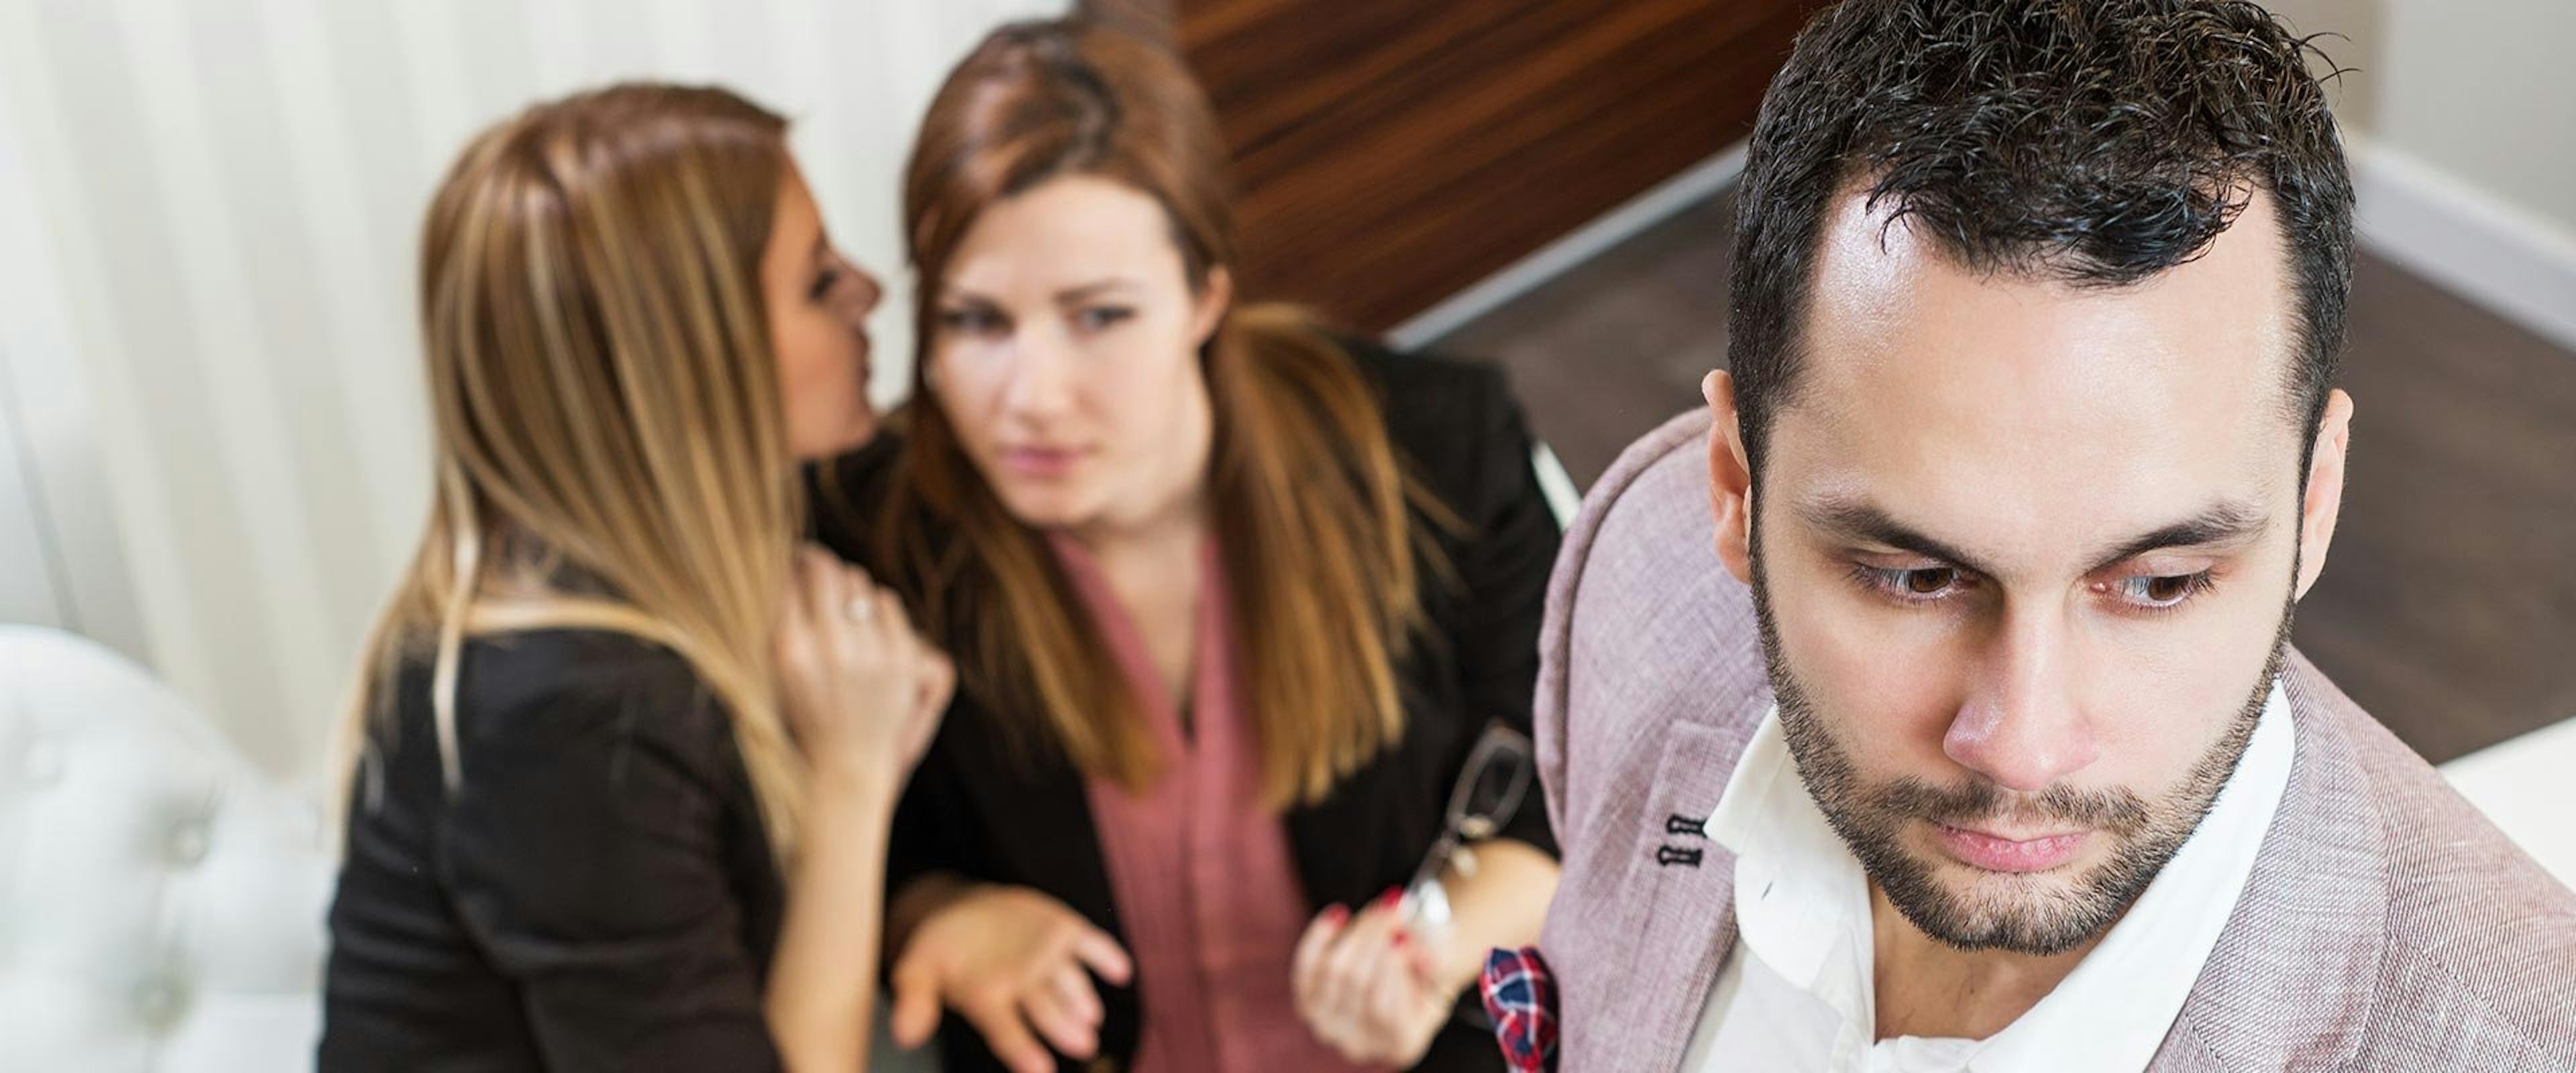 Discrimination in the workplace office gossip